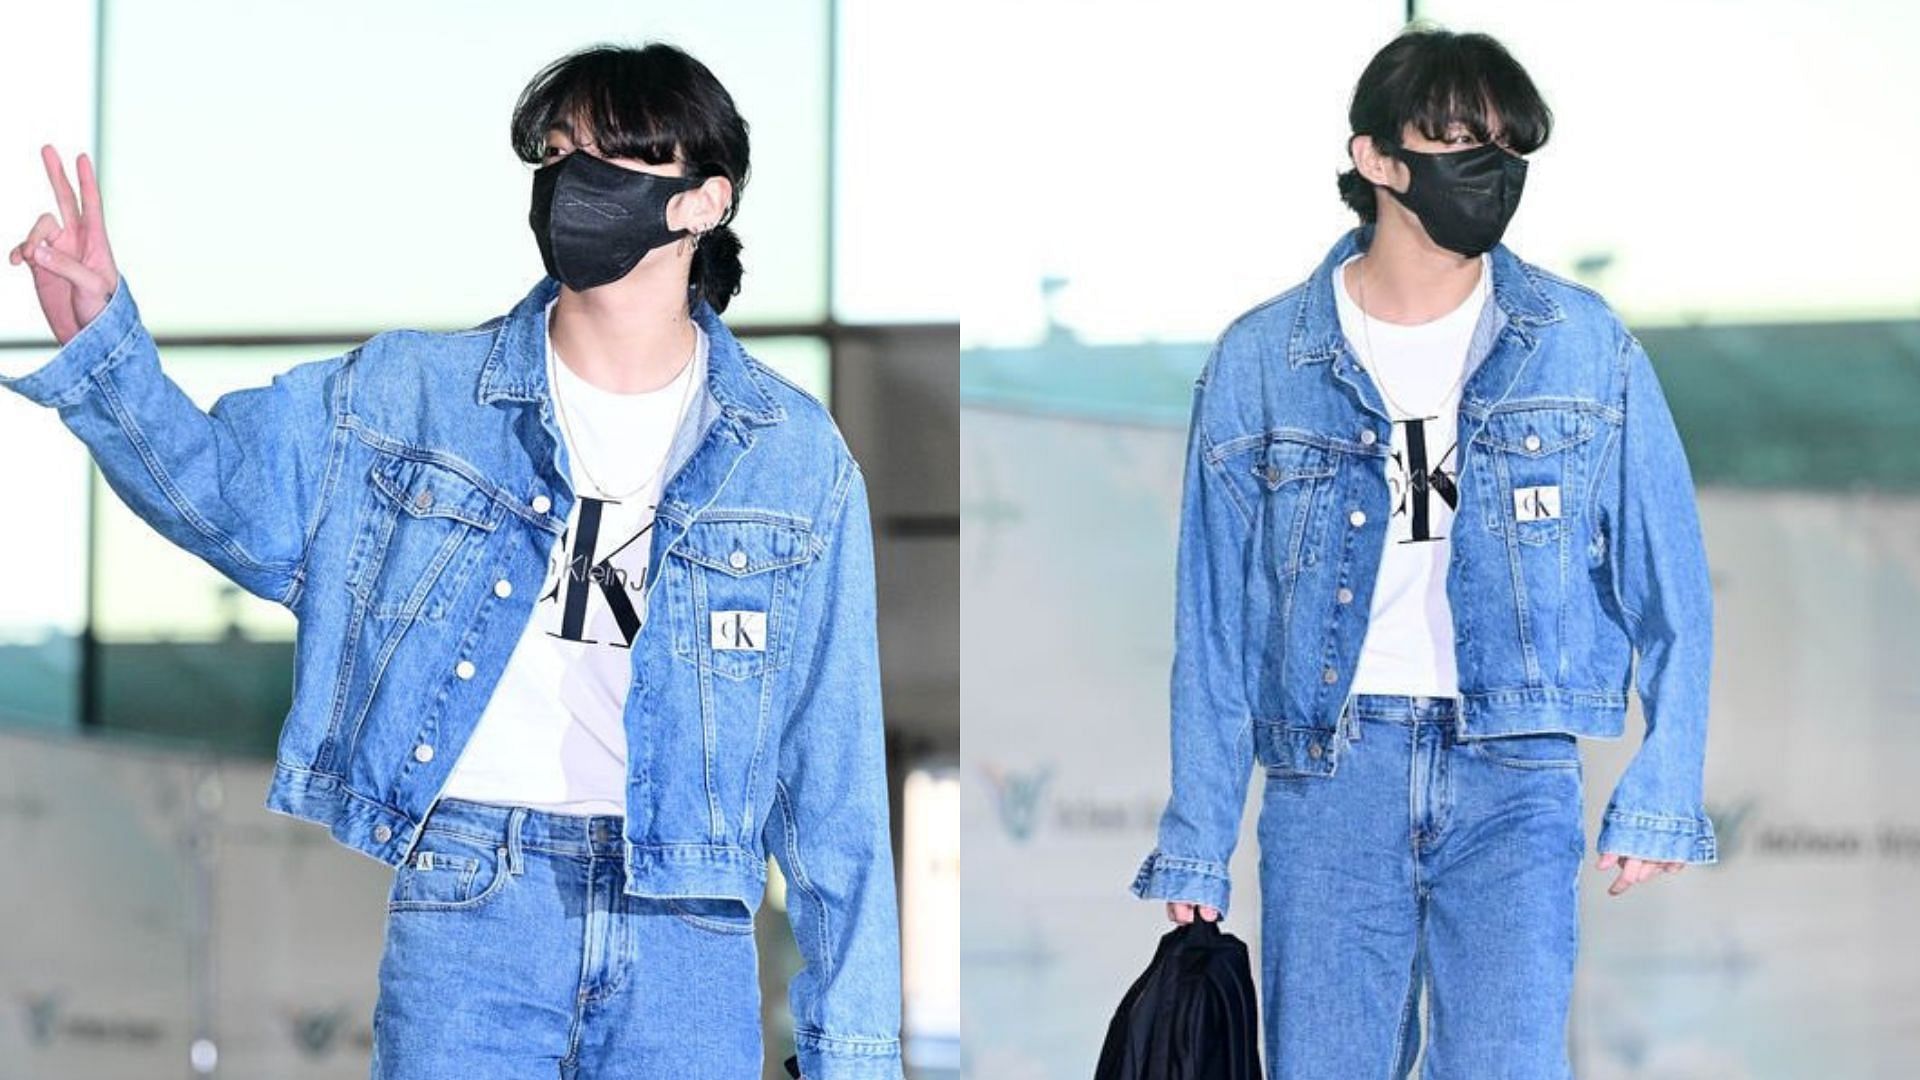 BTS's V Stole The Airport Runway With His Unique Colorful Pants